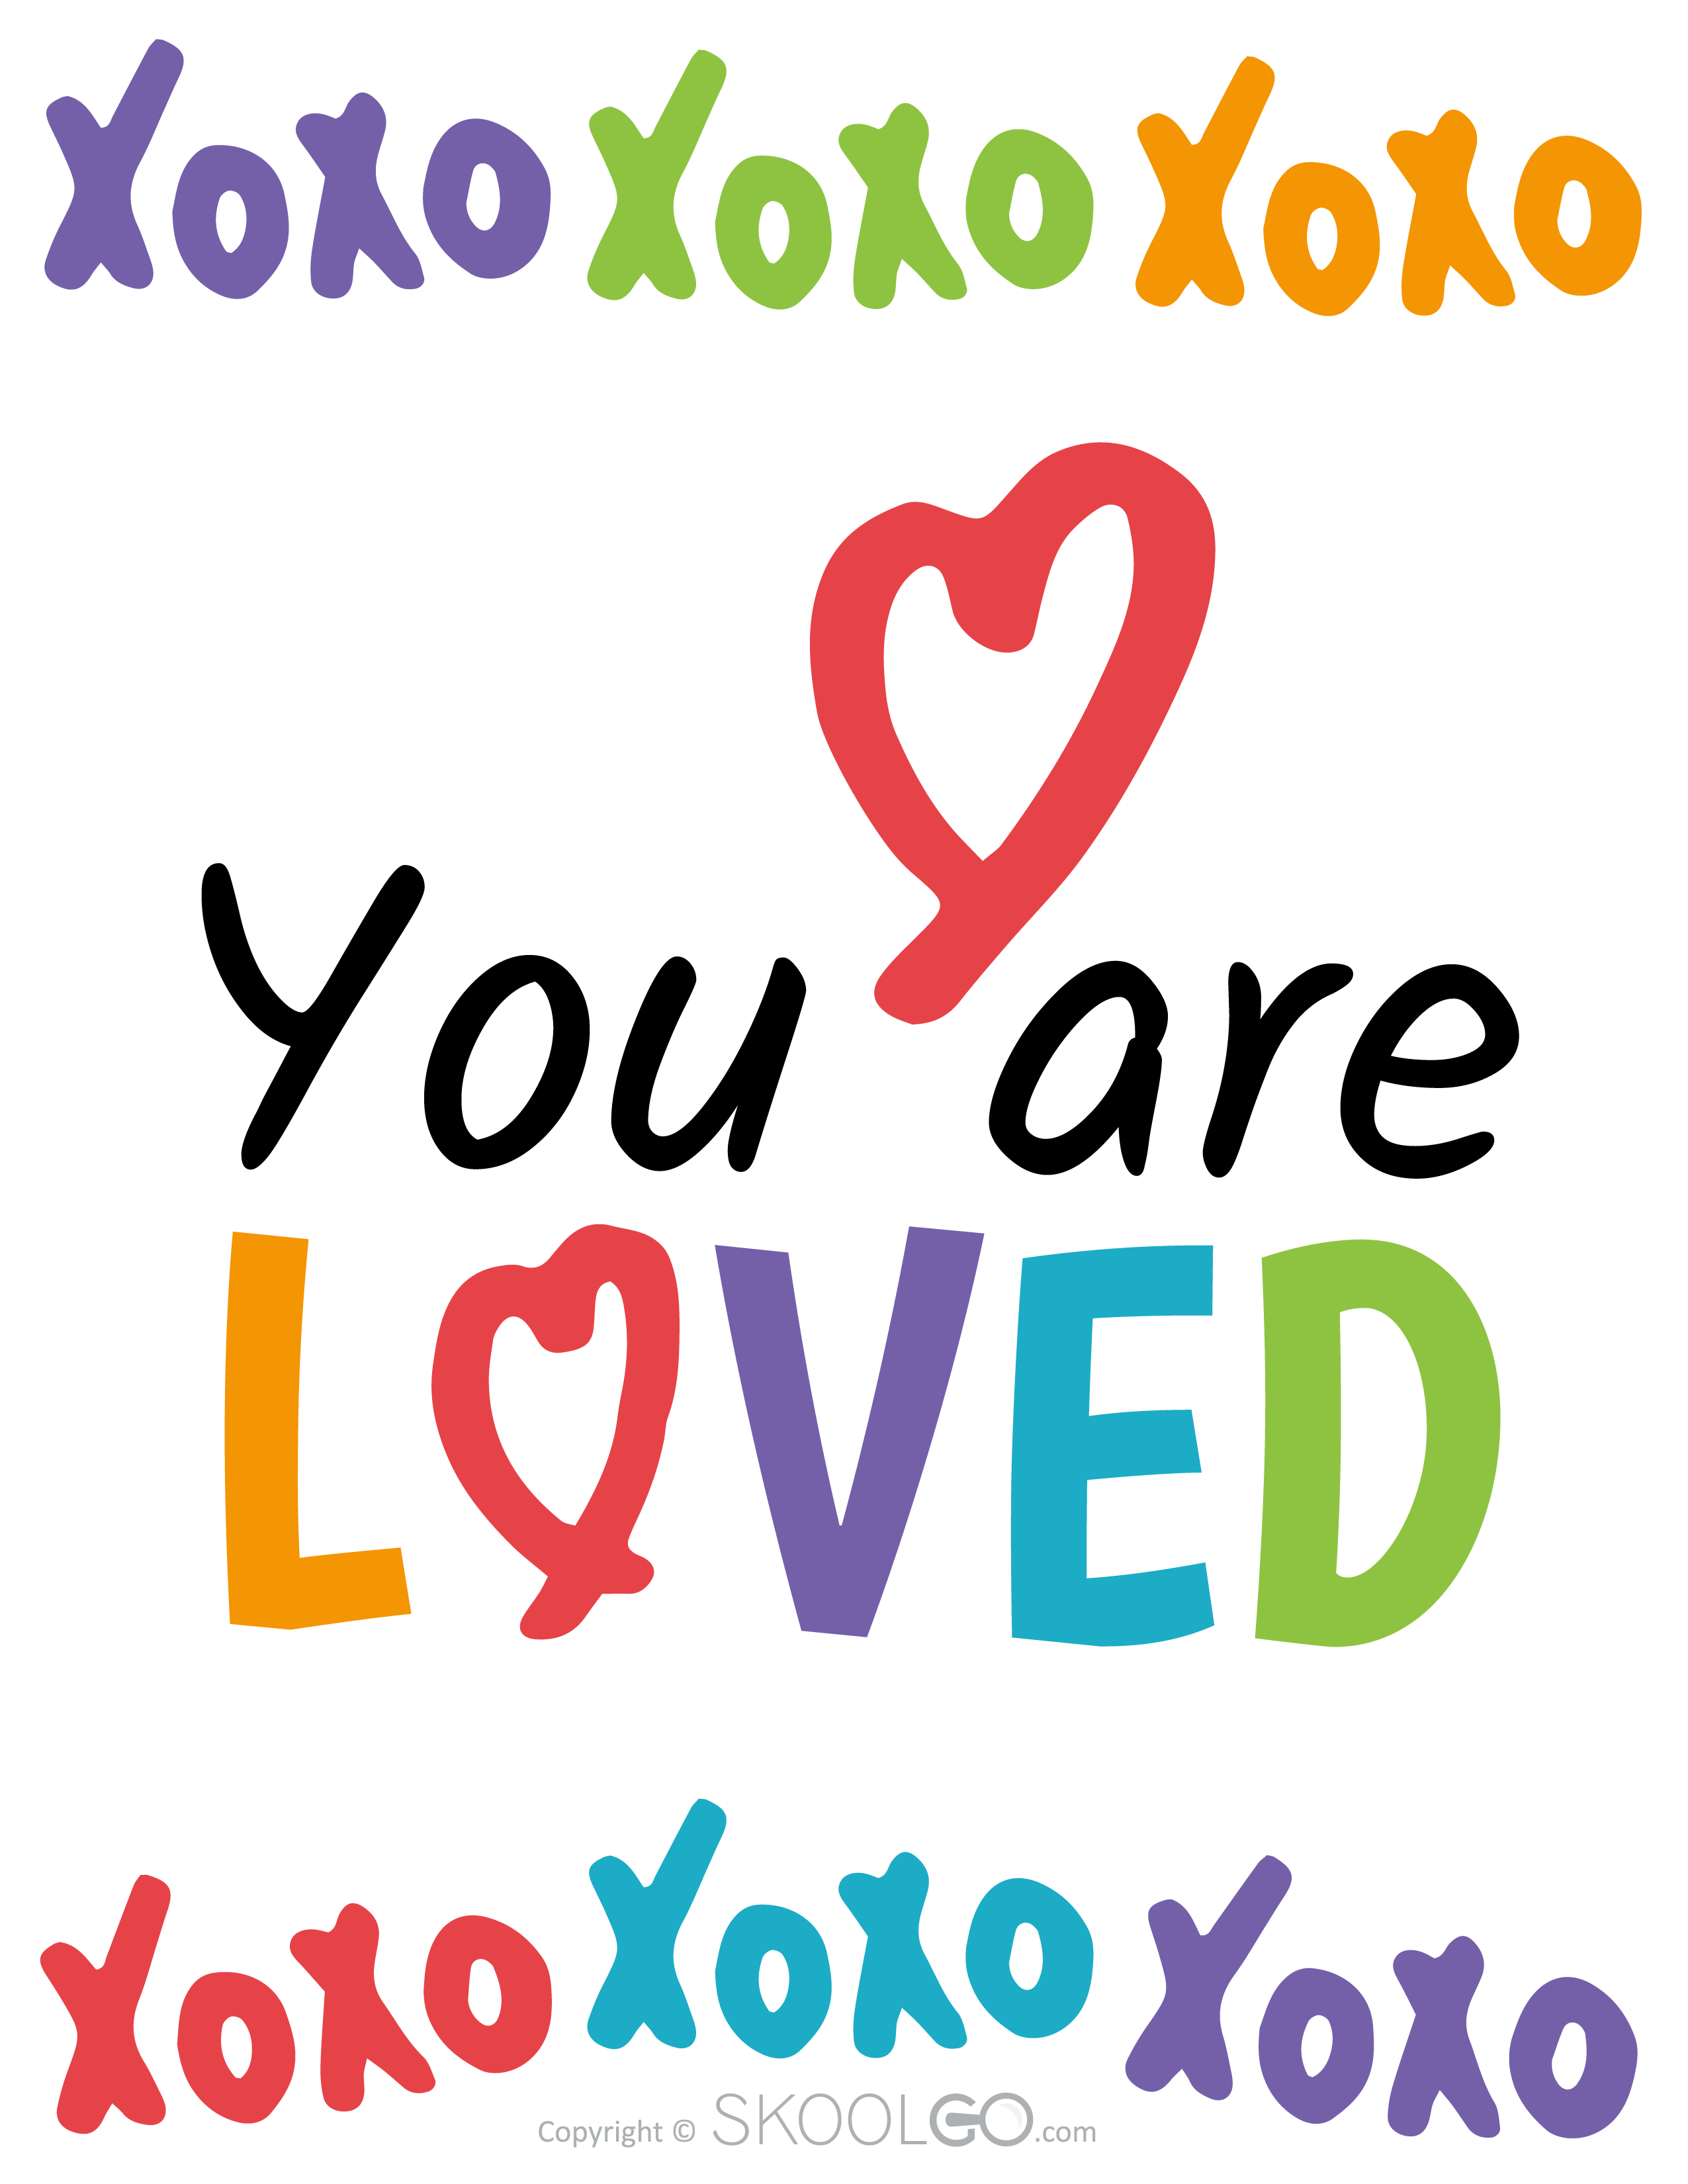 You Are Loved - Free Poster